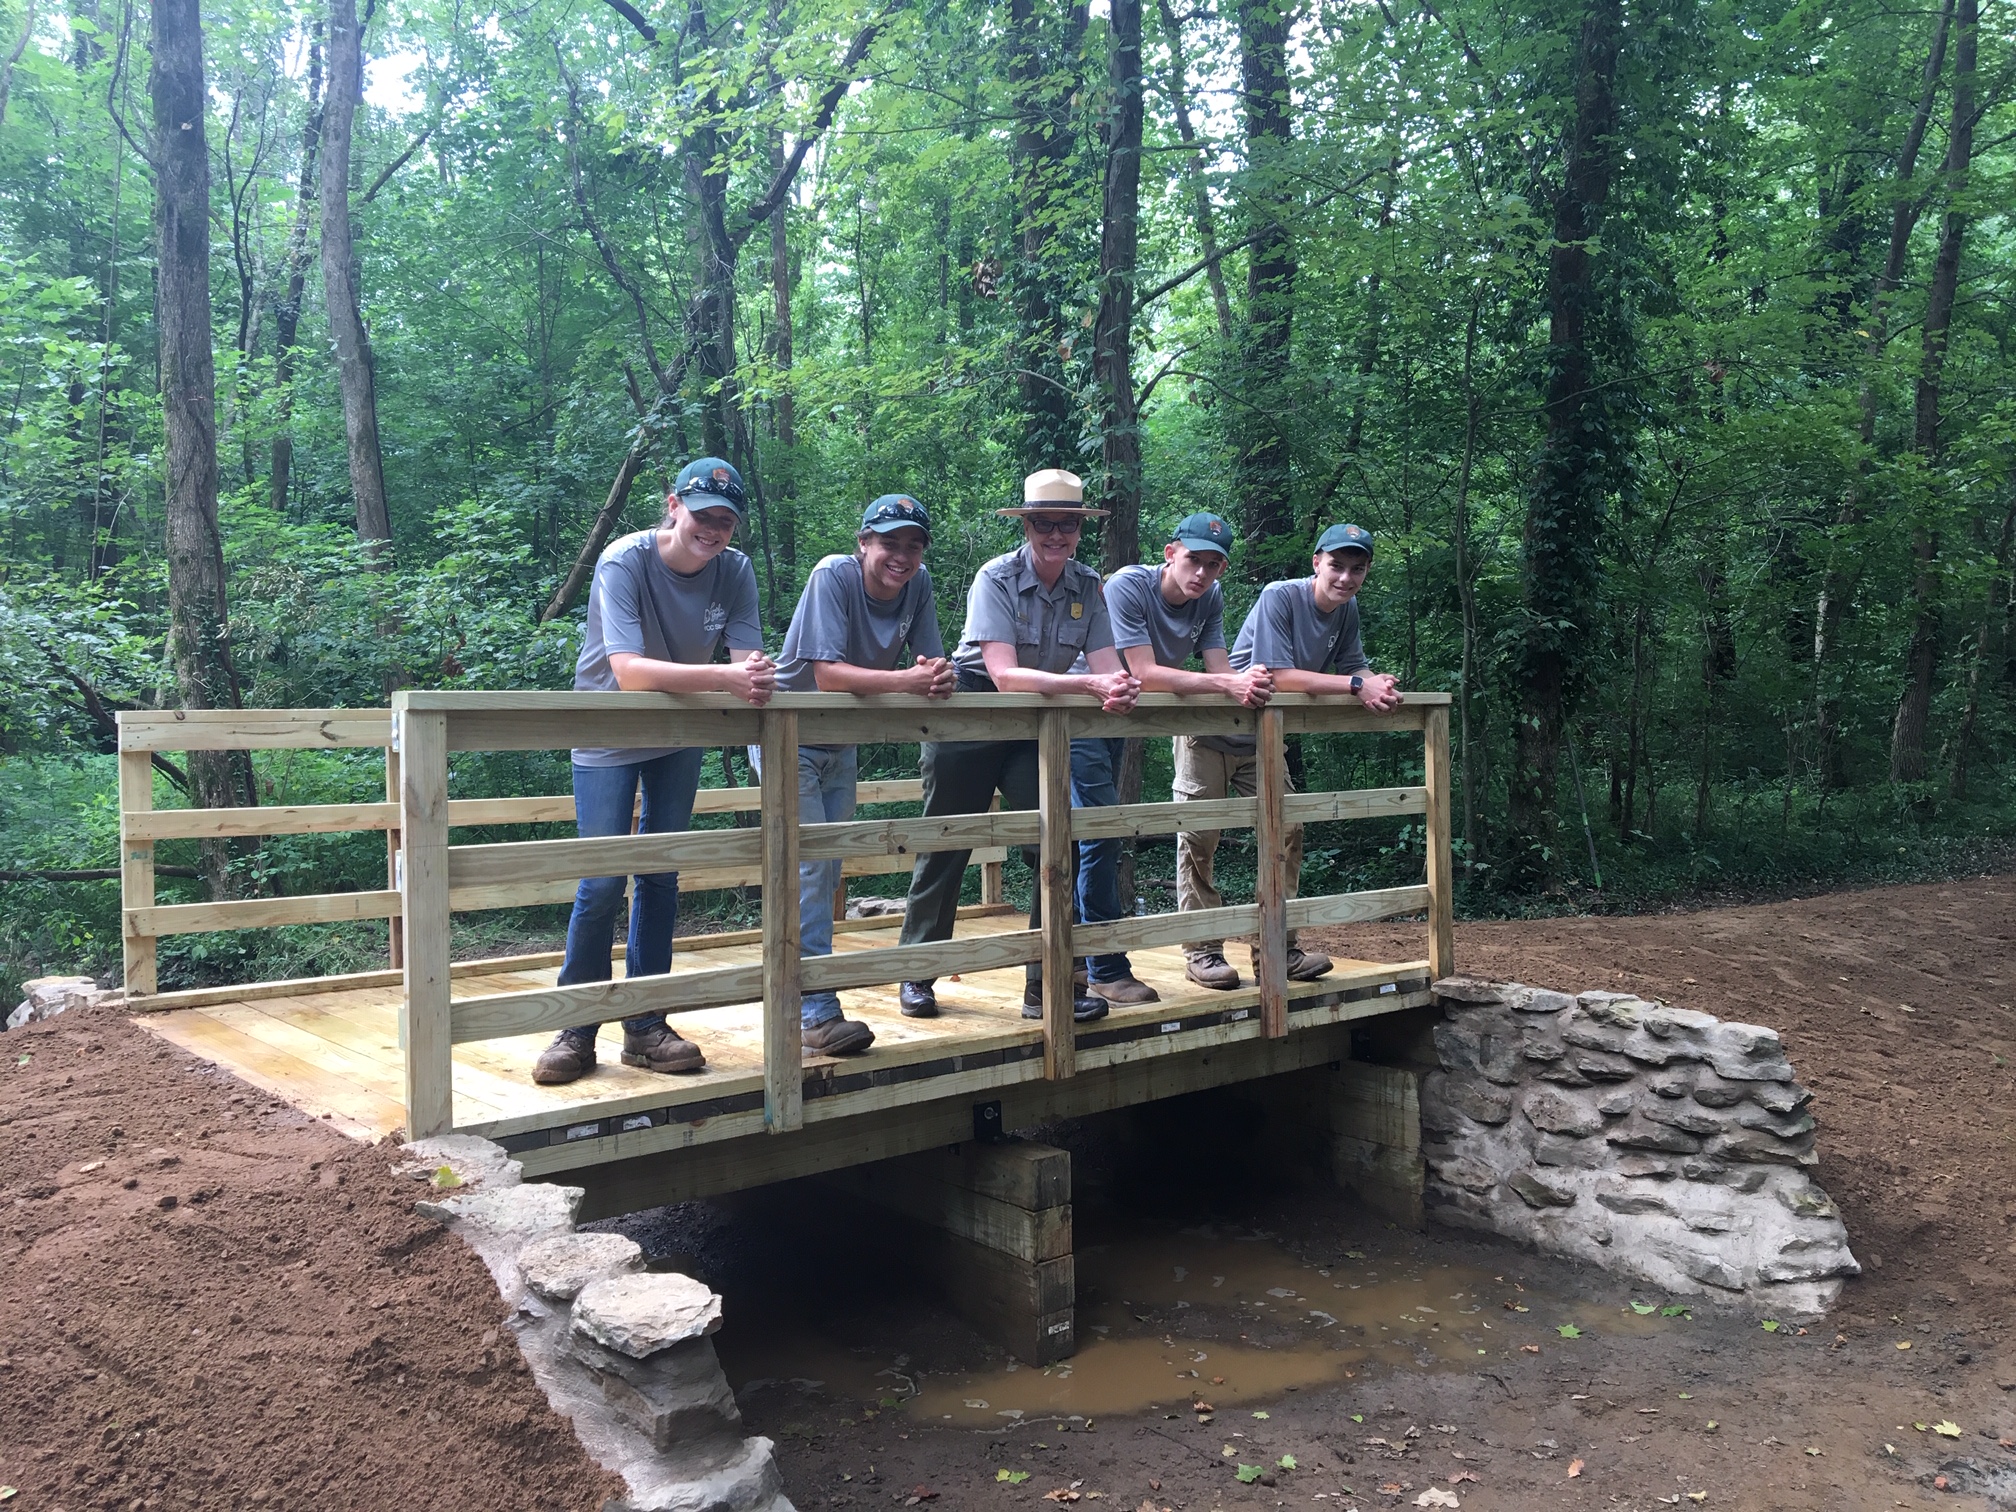 Park Ranger with four workers leaning on railing on bridge.